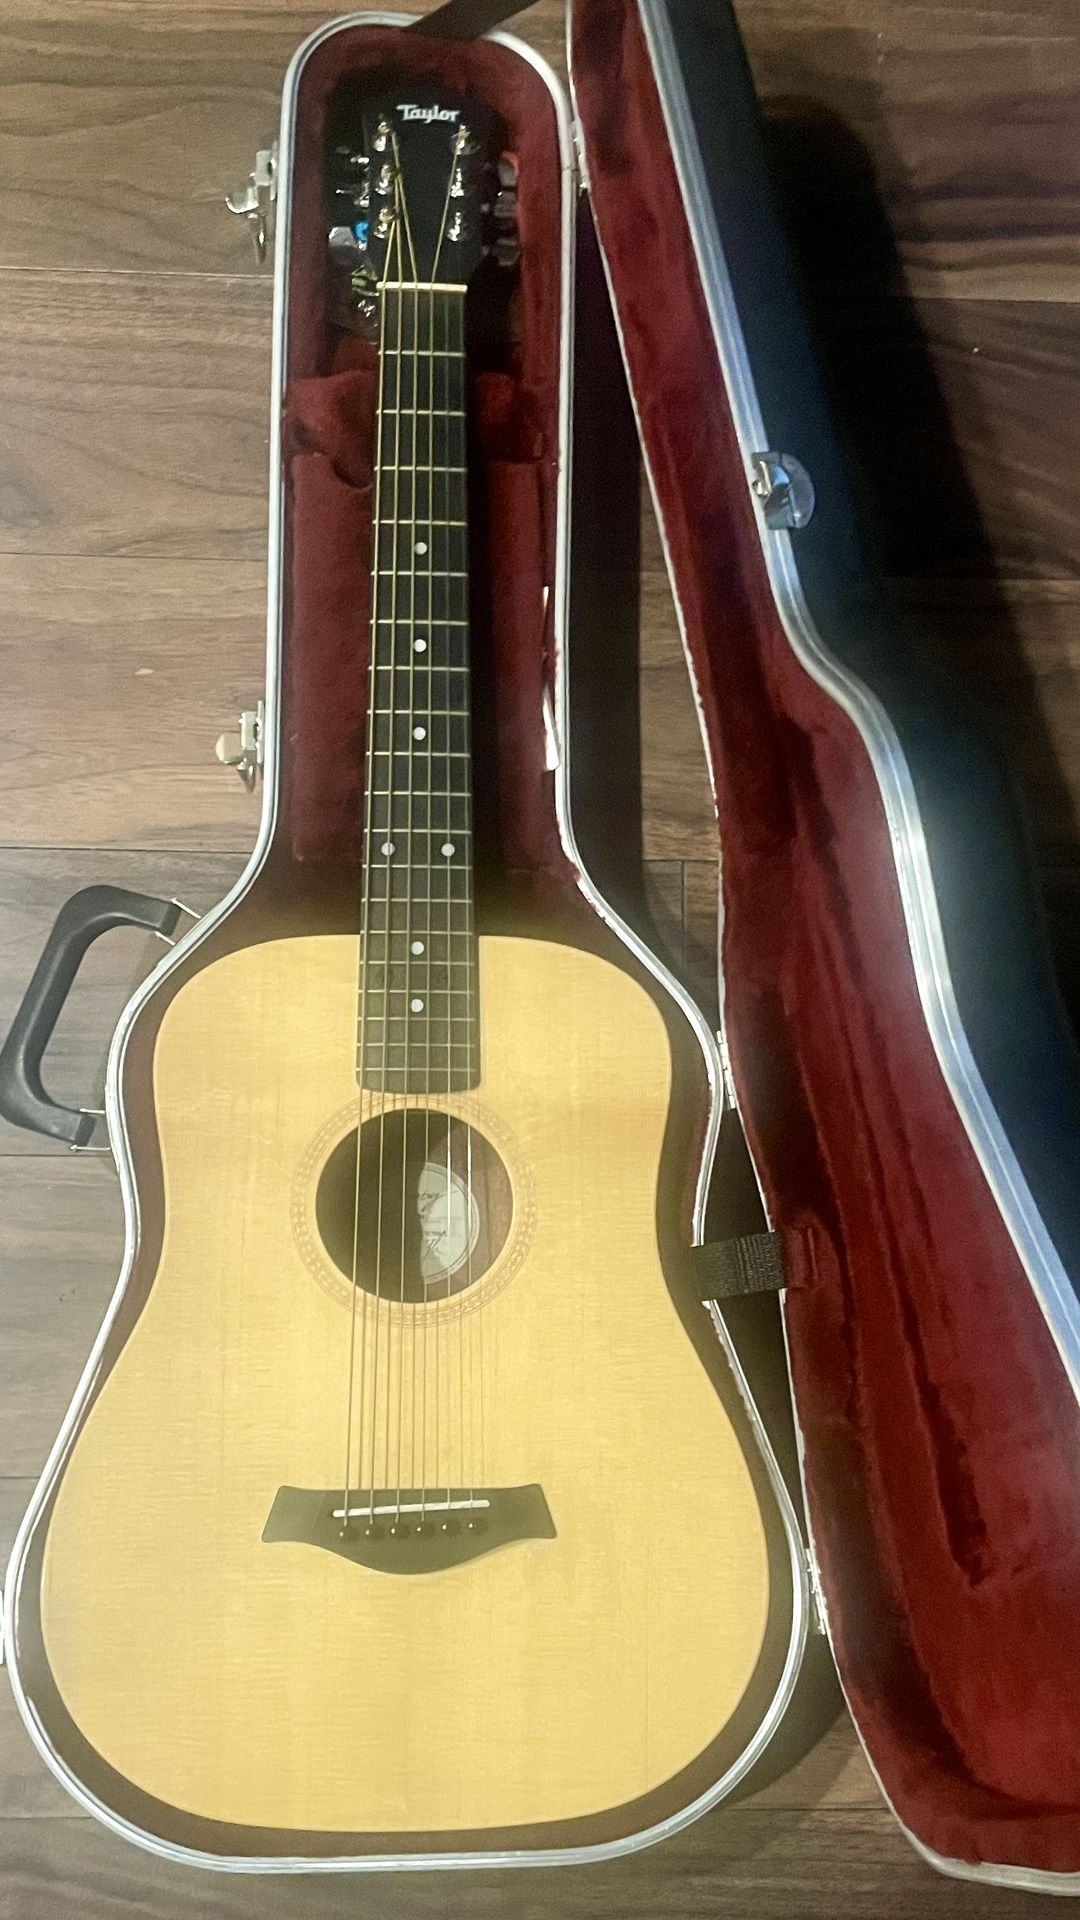 Baby Taylor 301- GB acoustic Guitar 